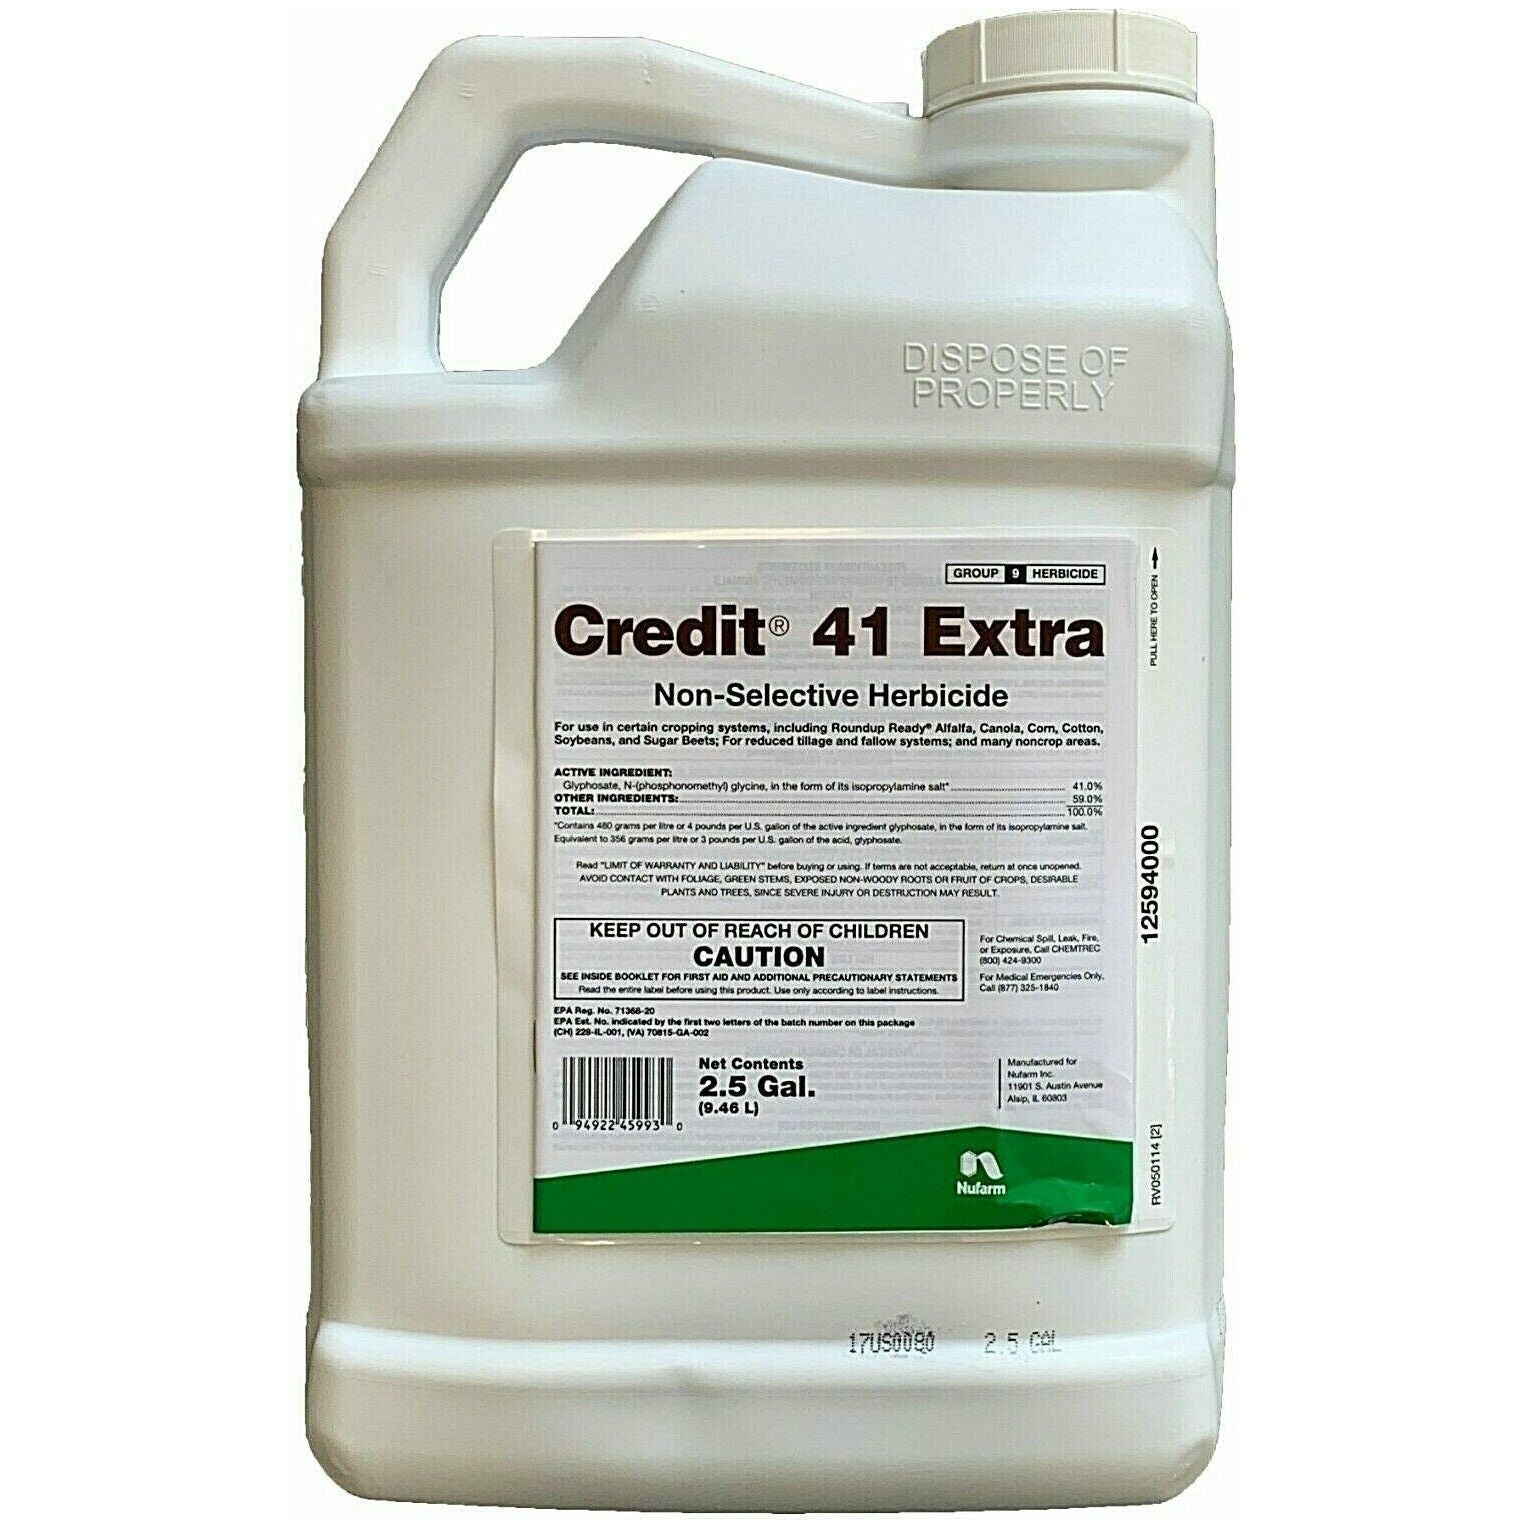 Credit 41 Extra Glyphosate Herbicide - 2.5 Gallons